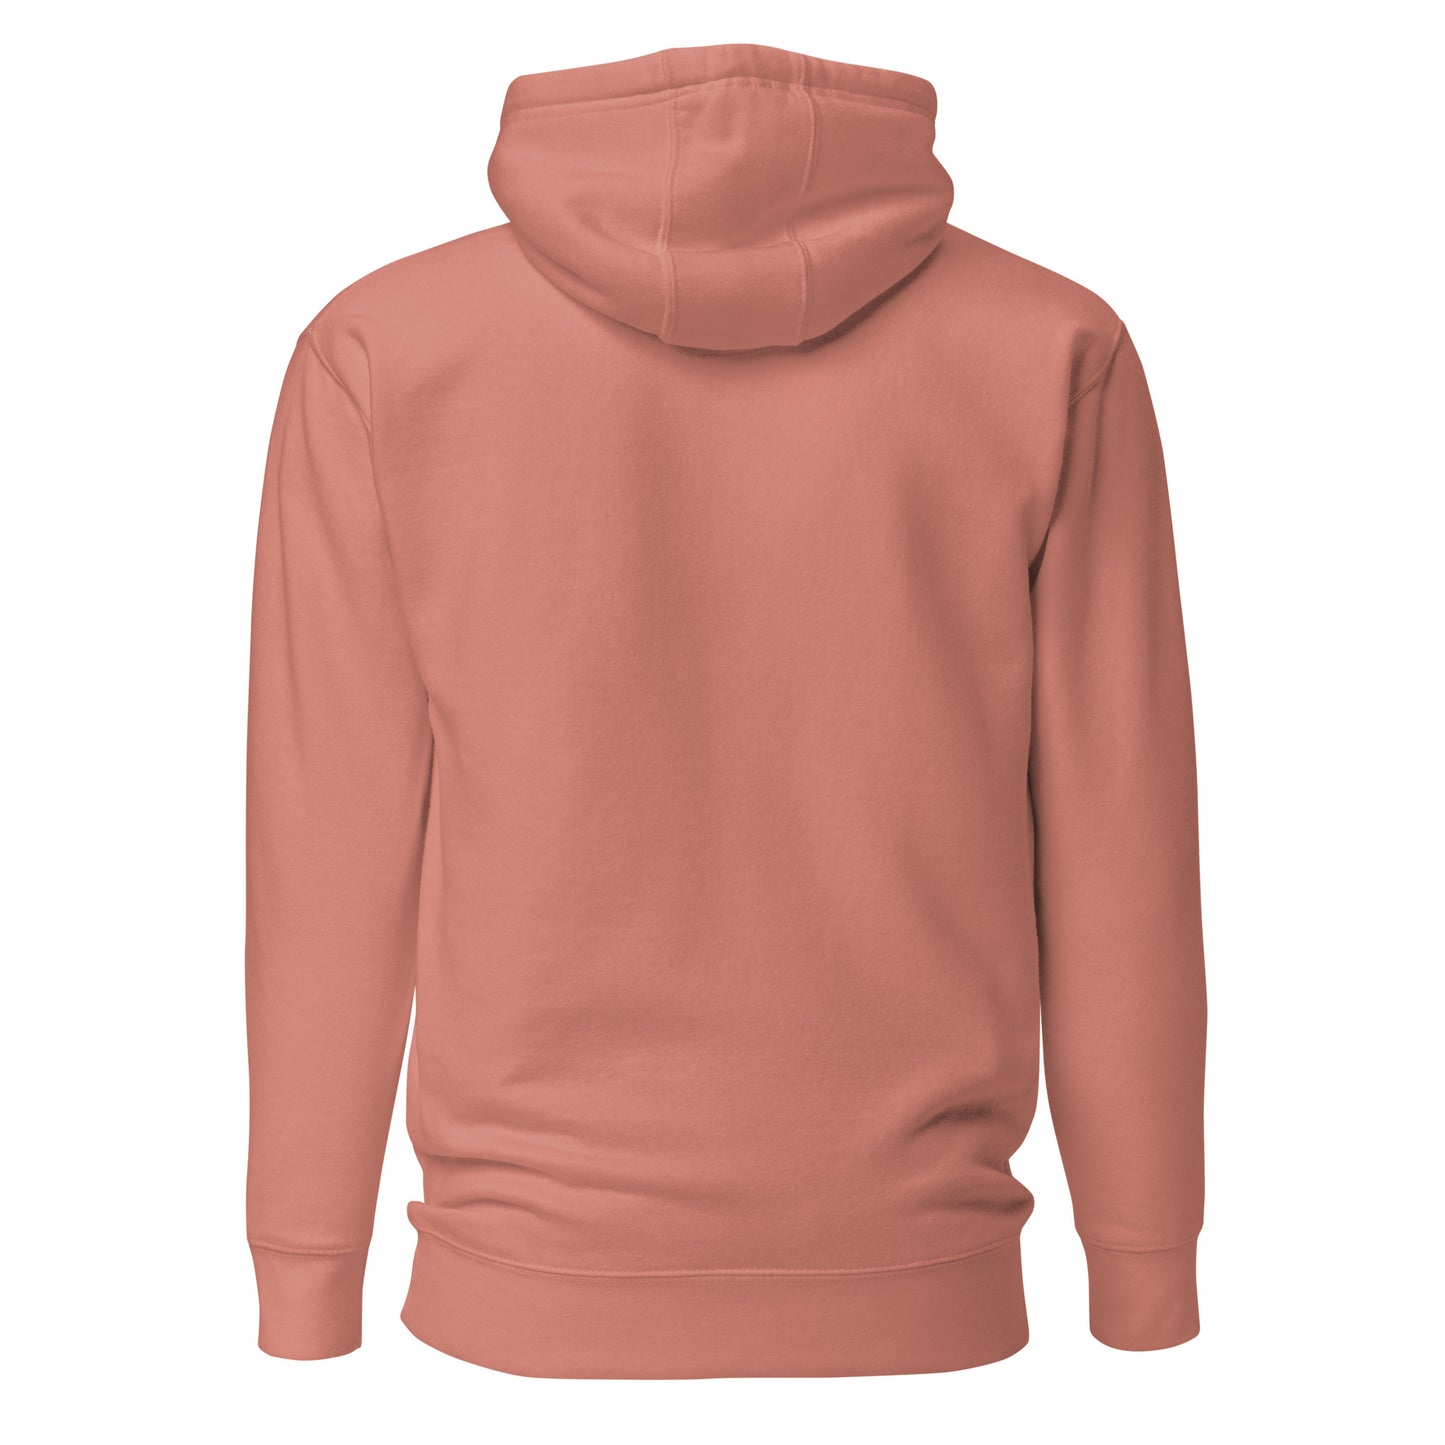 CLASSIC SPICY LIFE HOODIE